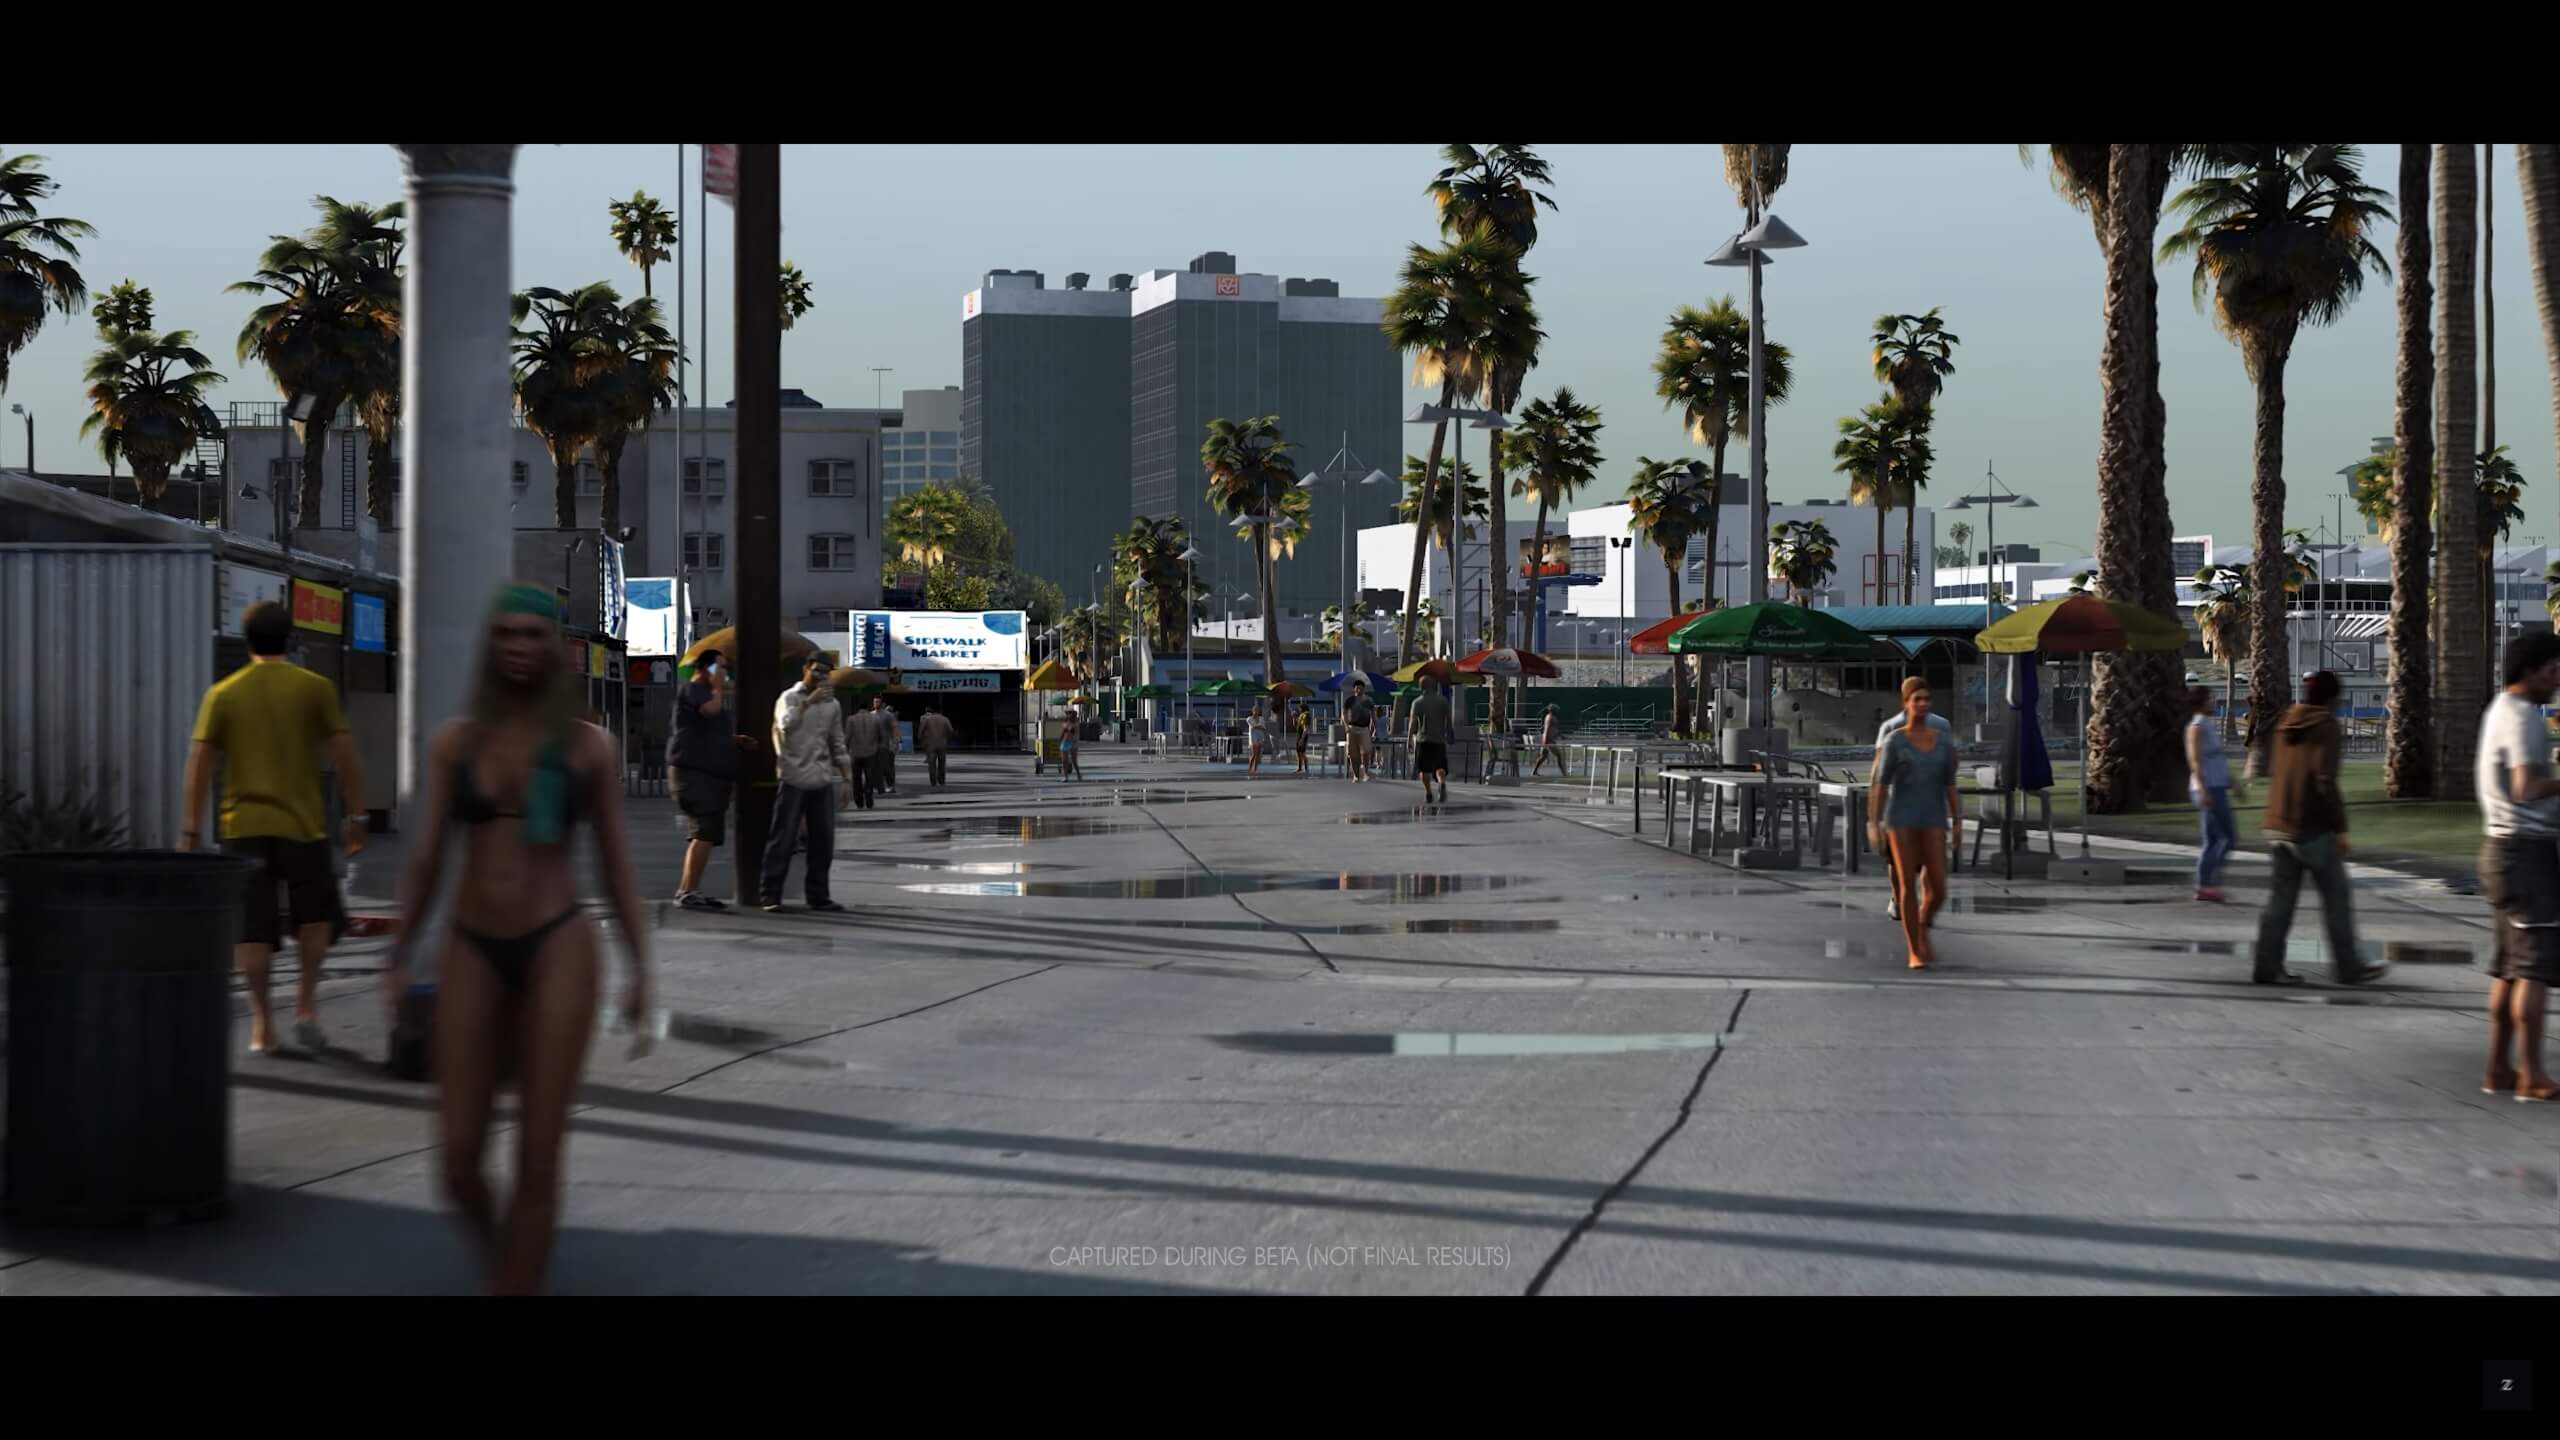 GTA 5 graphics mod looks exceptional